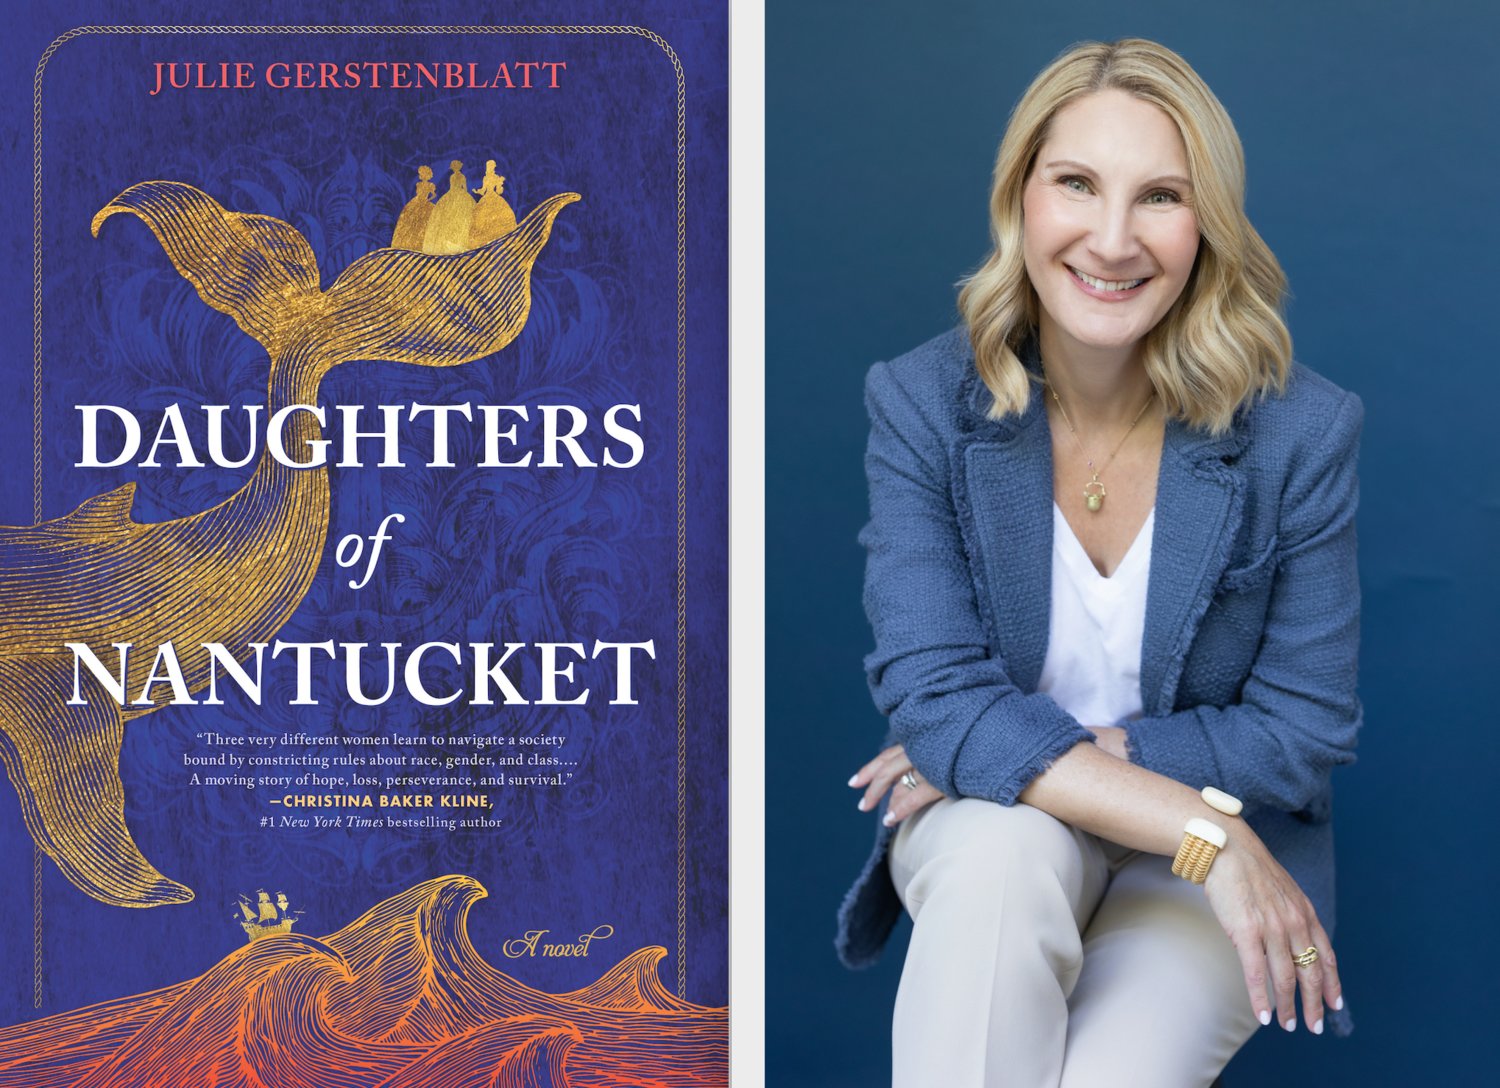 Julie Gerstenblatt will sign copies of her debut novel “Daughters of Nantucket” at a special event at Inkfish Books in Warren on Thursday.